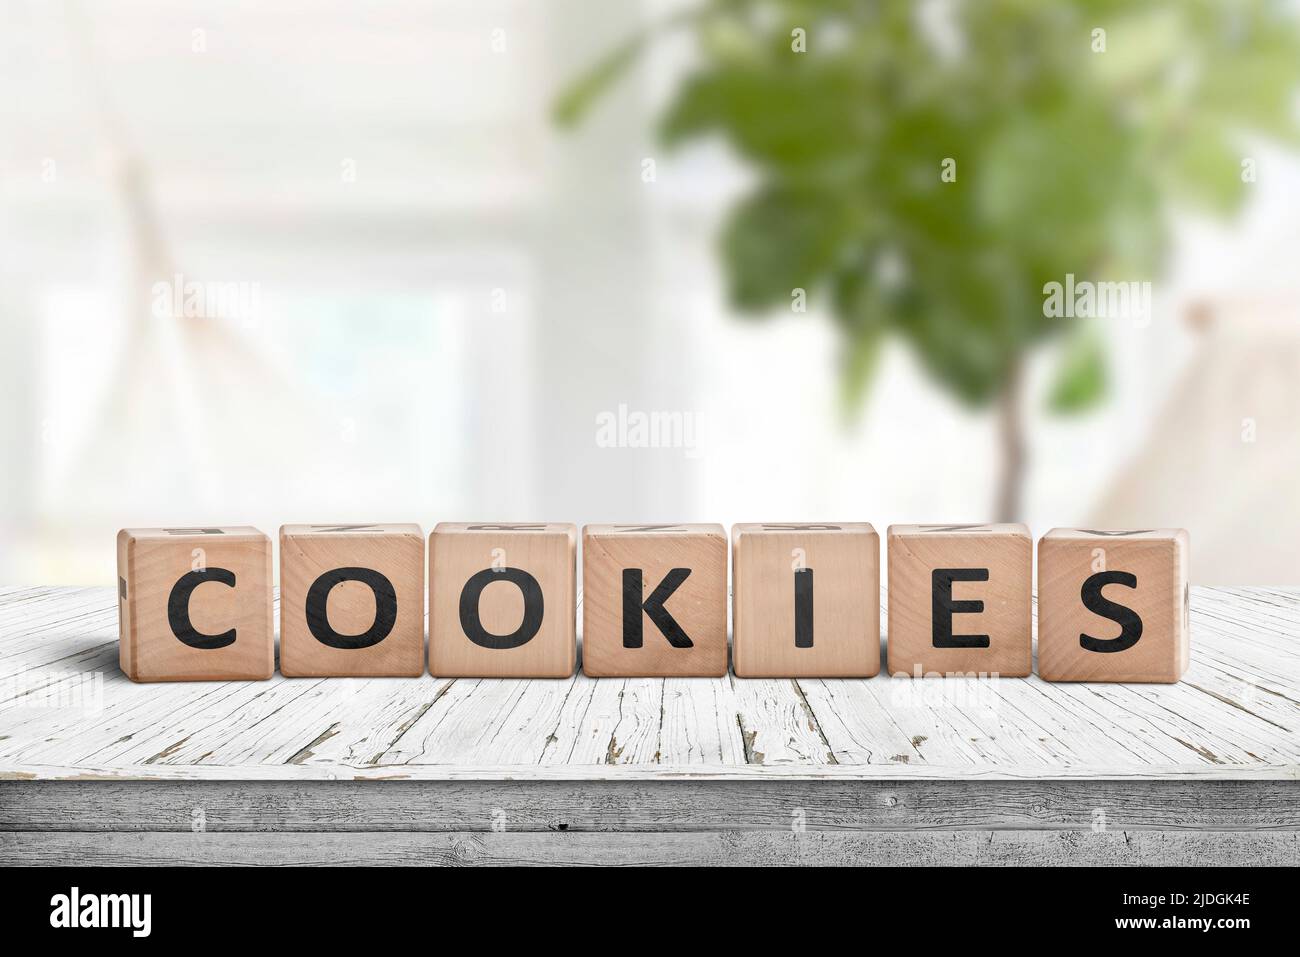 Cookies word on wooden blocks in a bright living area with green plants Stock Photo